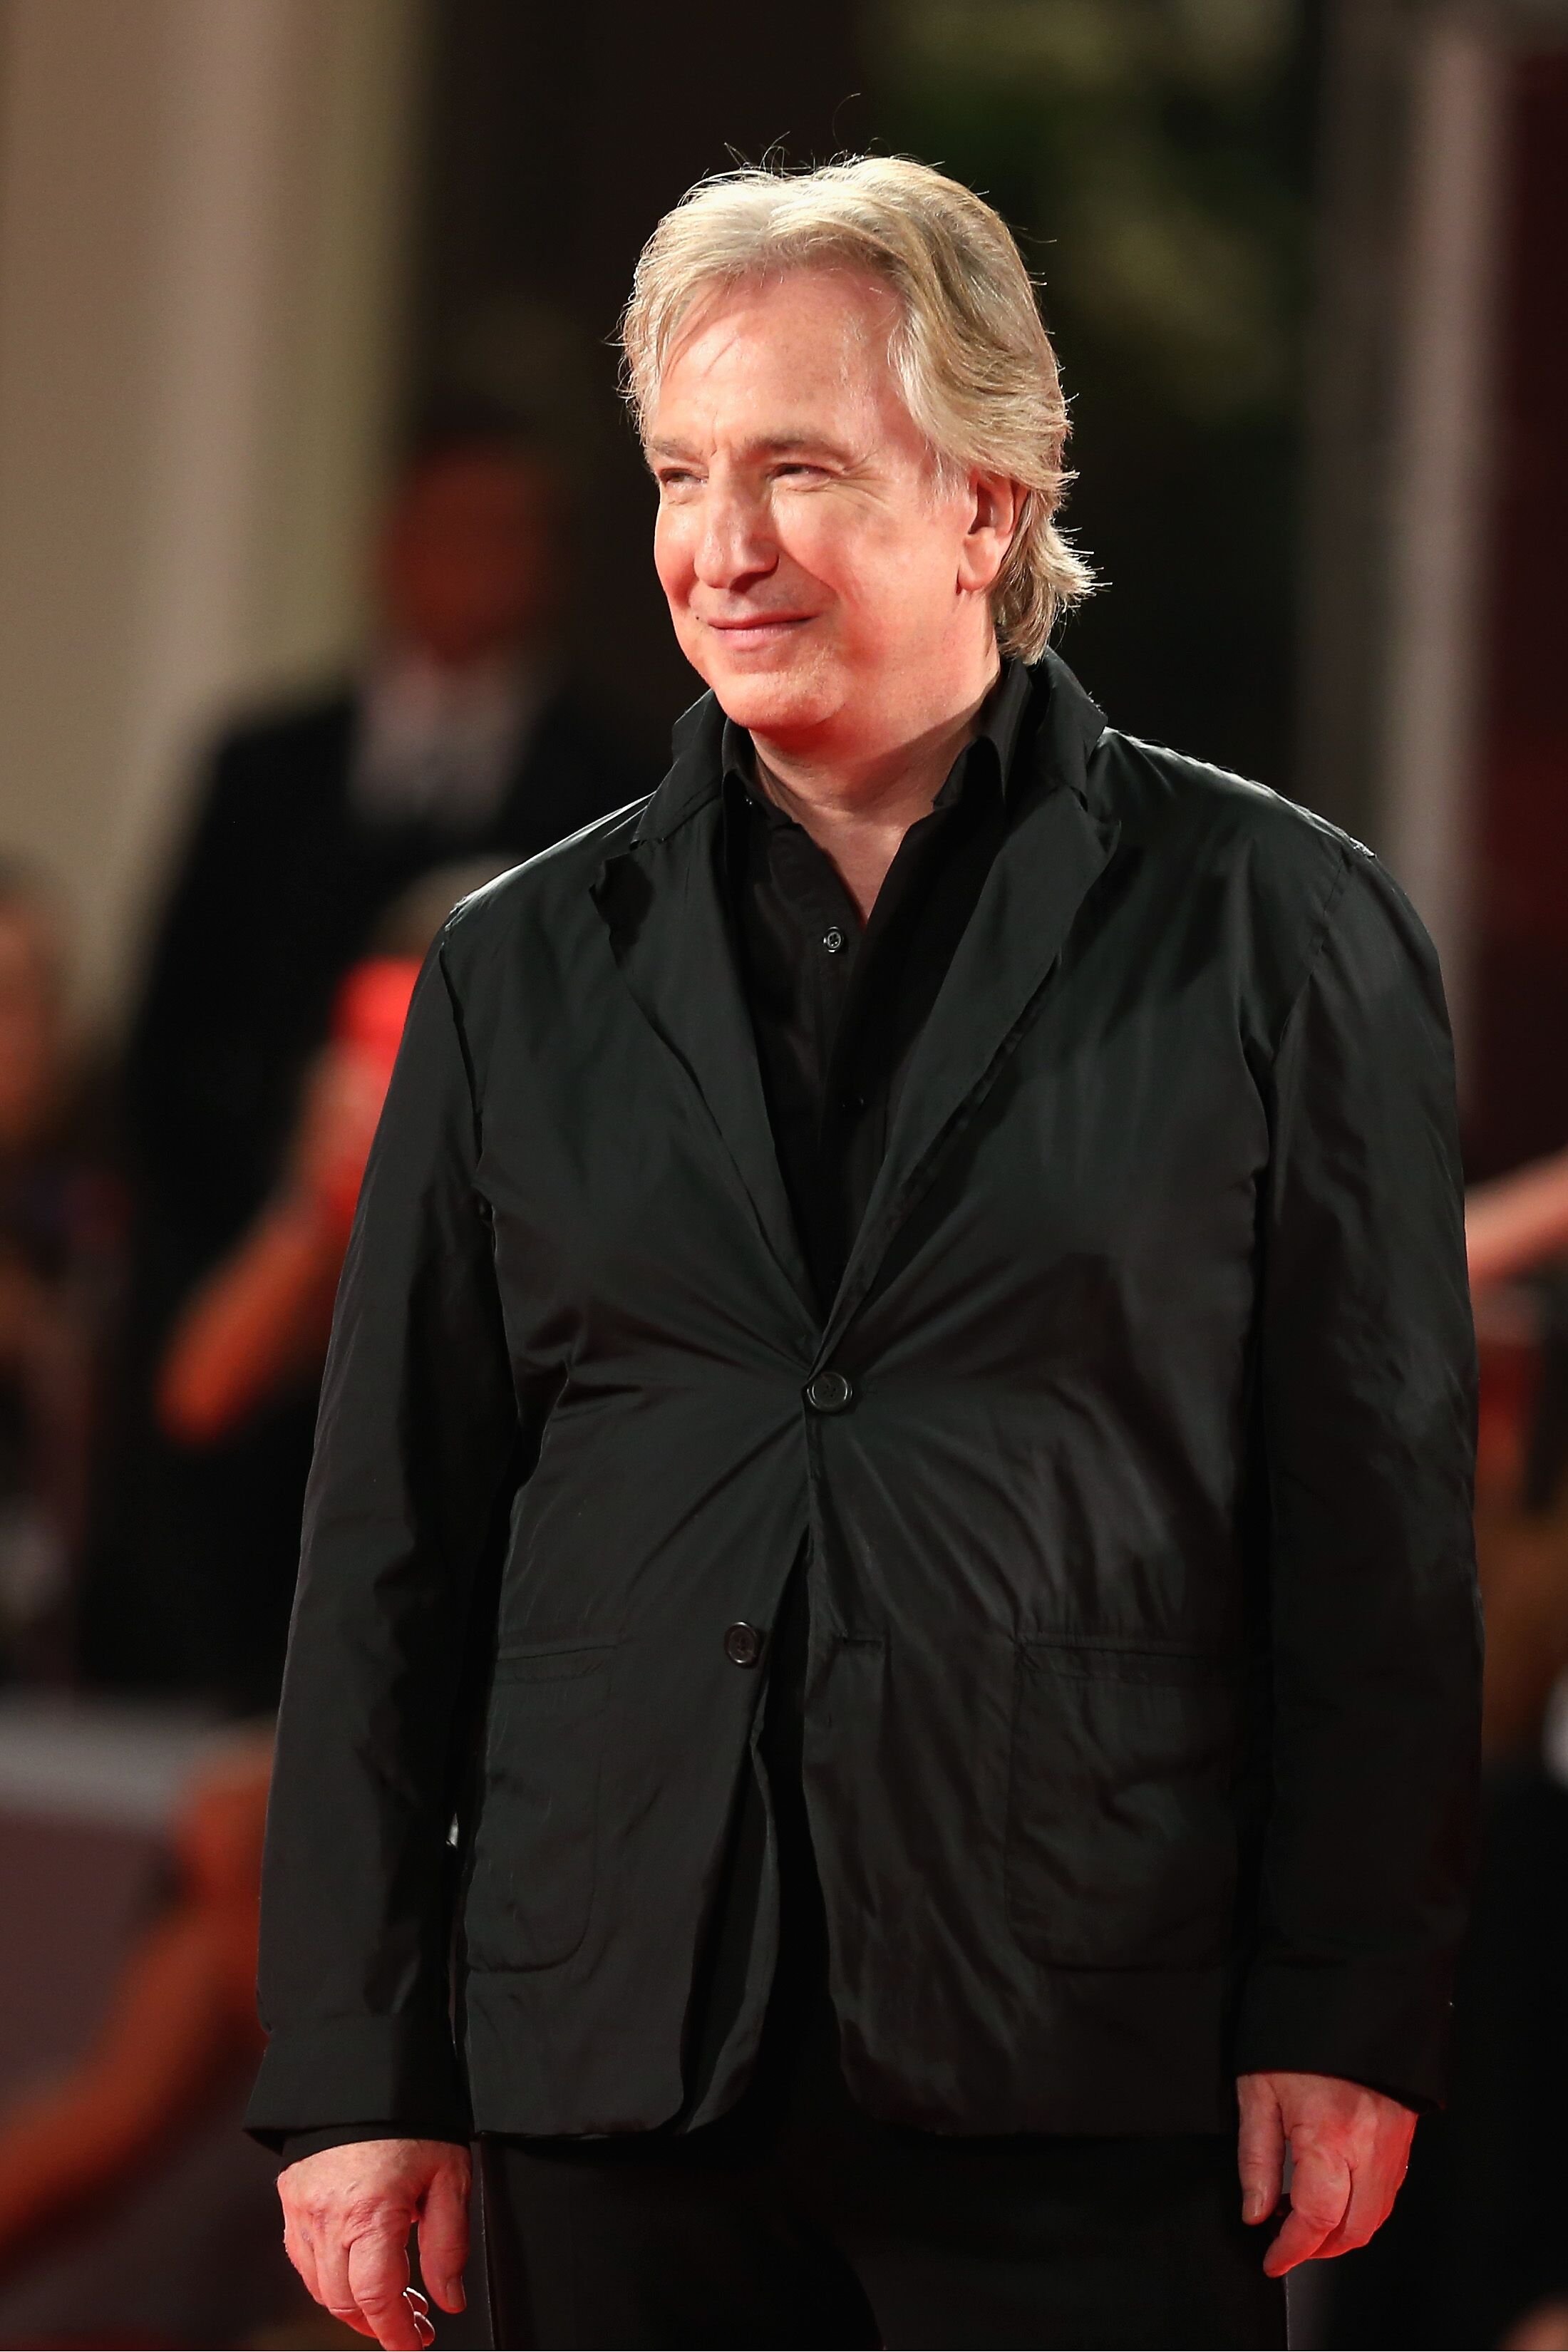 Alan Rickman attends the 'Une Promesse' Premiere. | Source: Getty Images